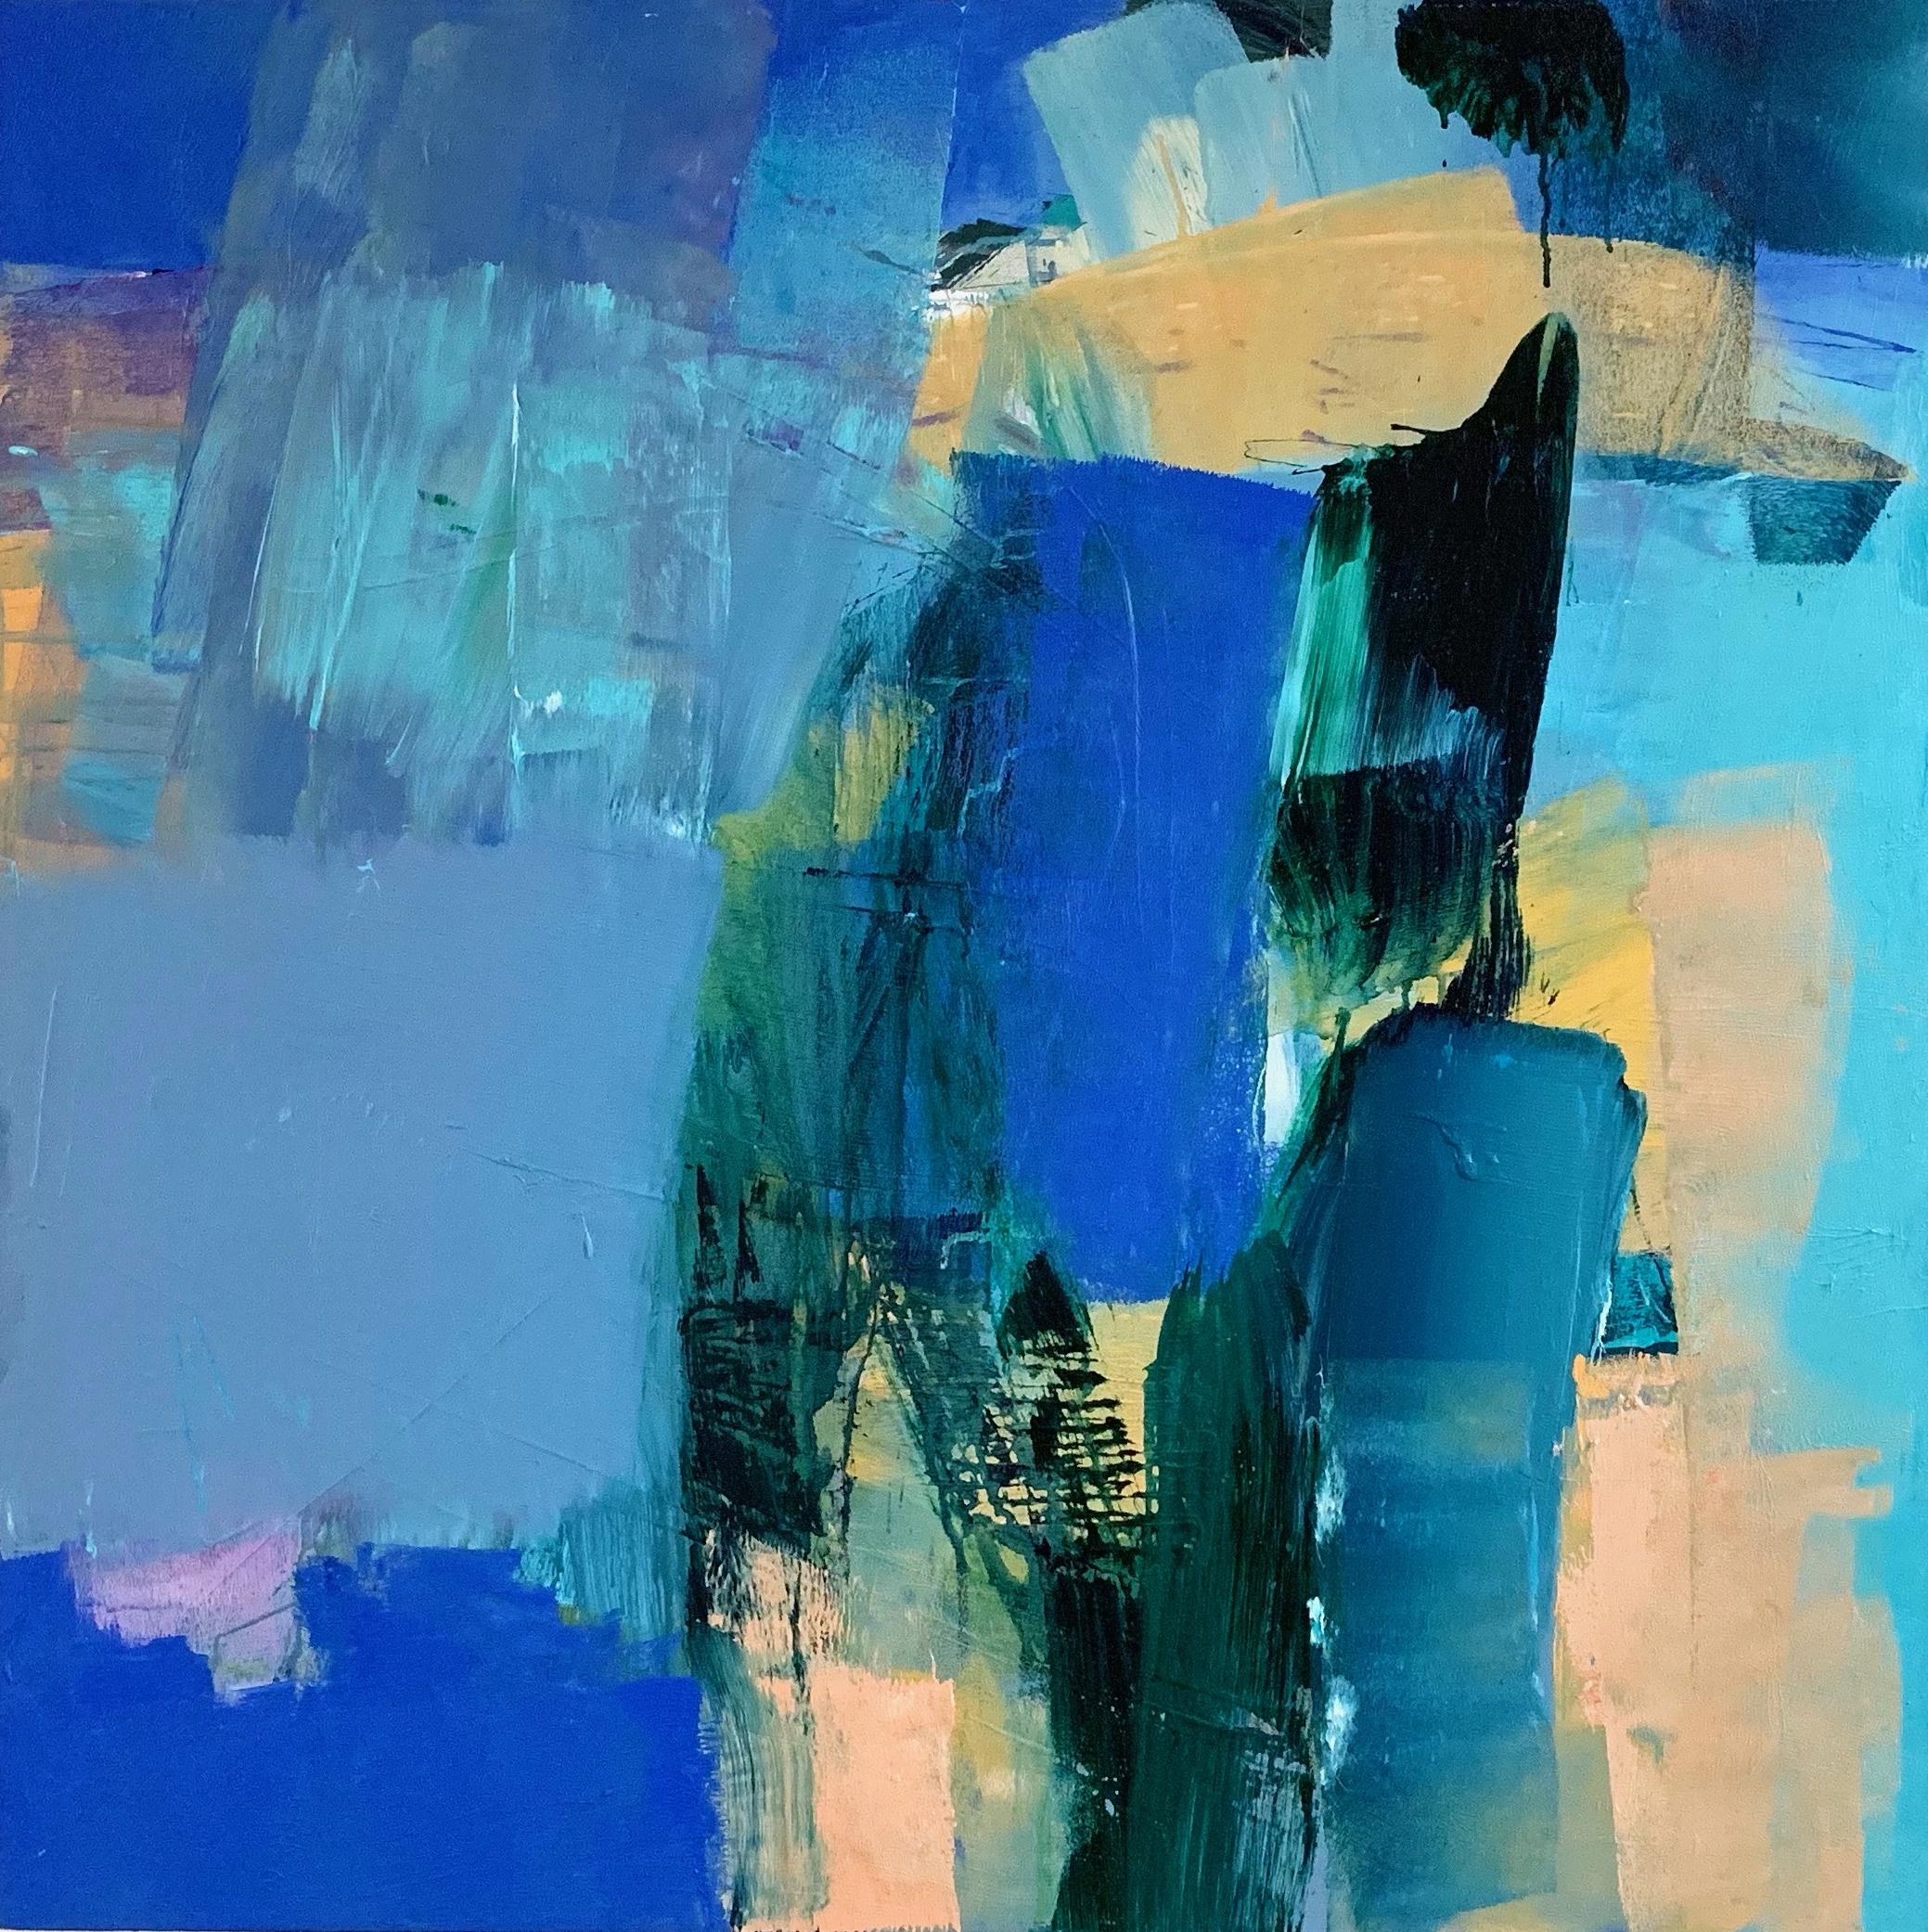 Marrakech: Abstract Painting by Deborah Lanyon with gold and blue